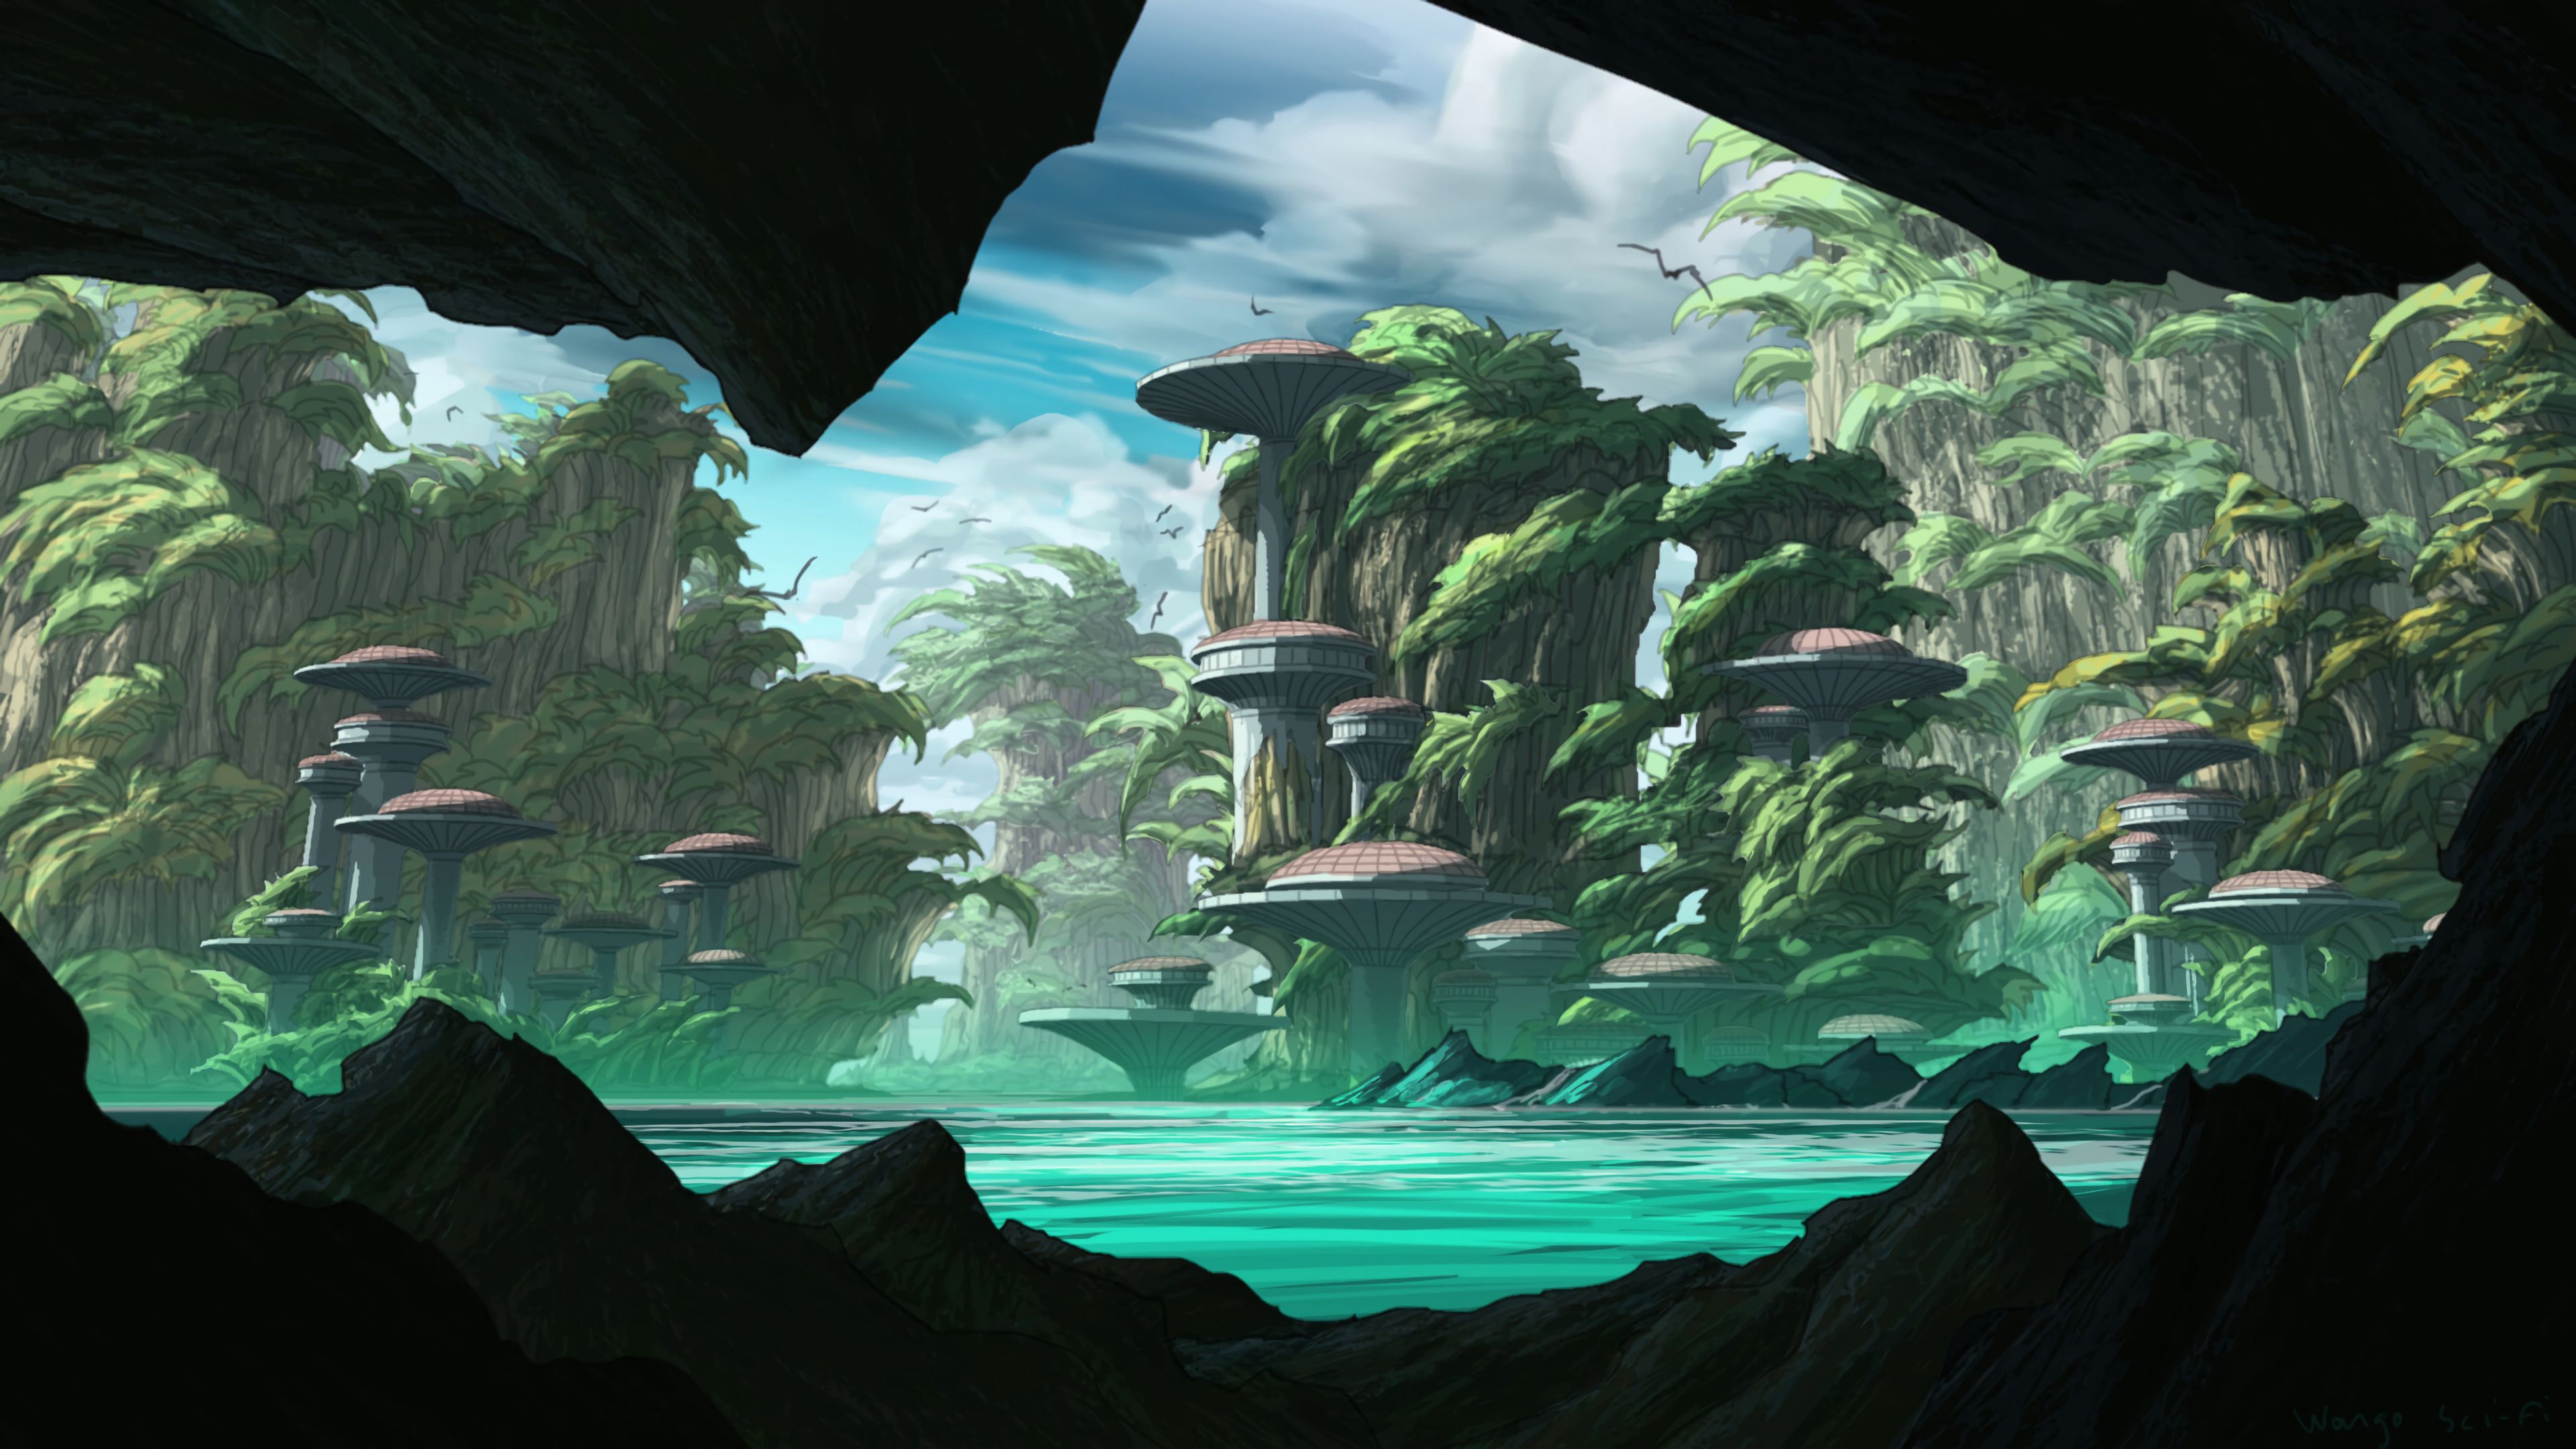 sci fi, art, building, rocks, island, fiction, that's incredible wallpapers for tablet